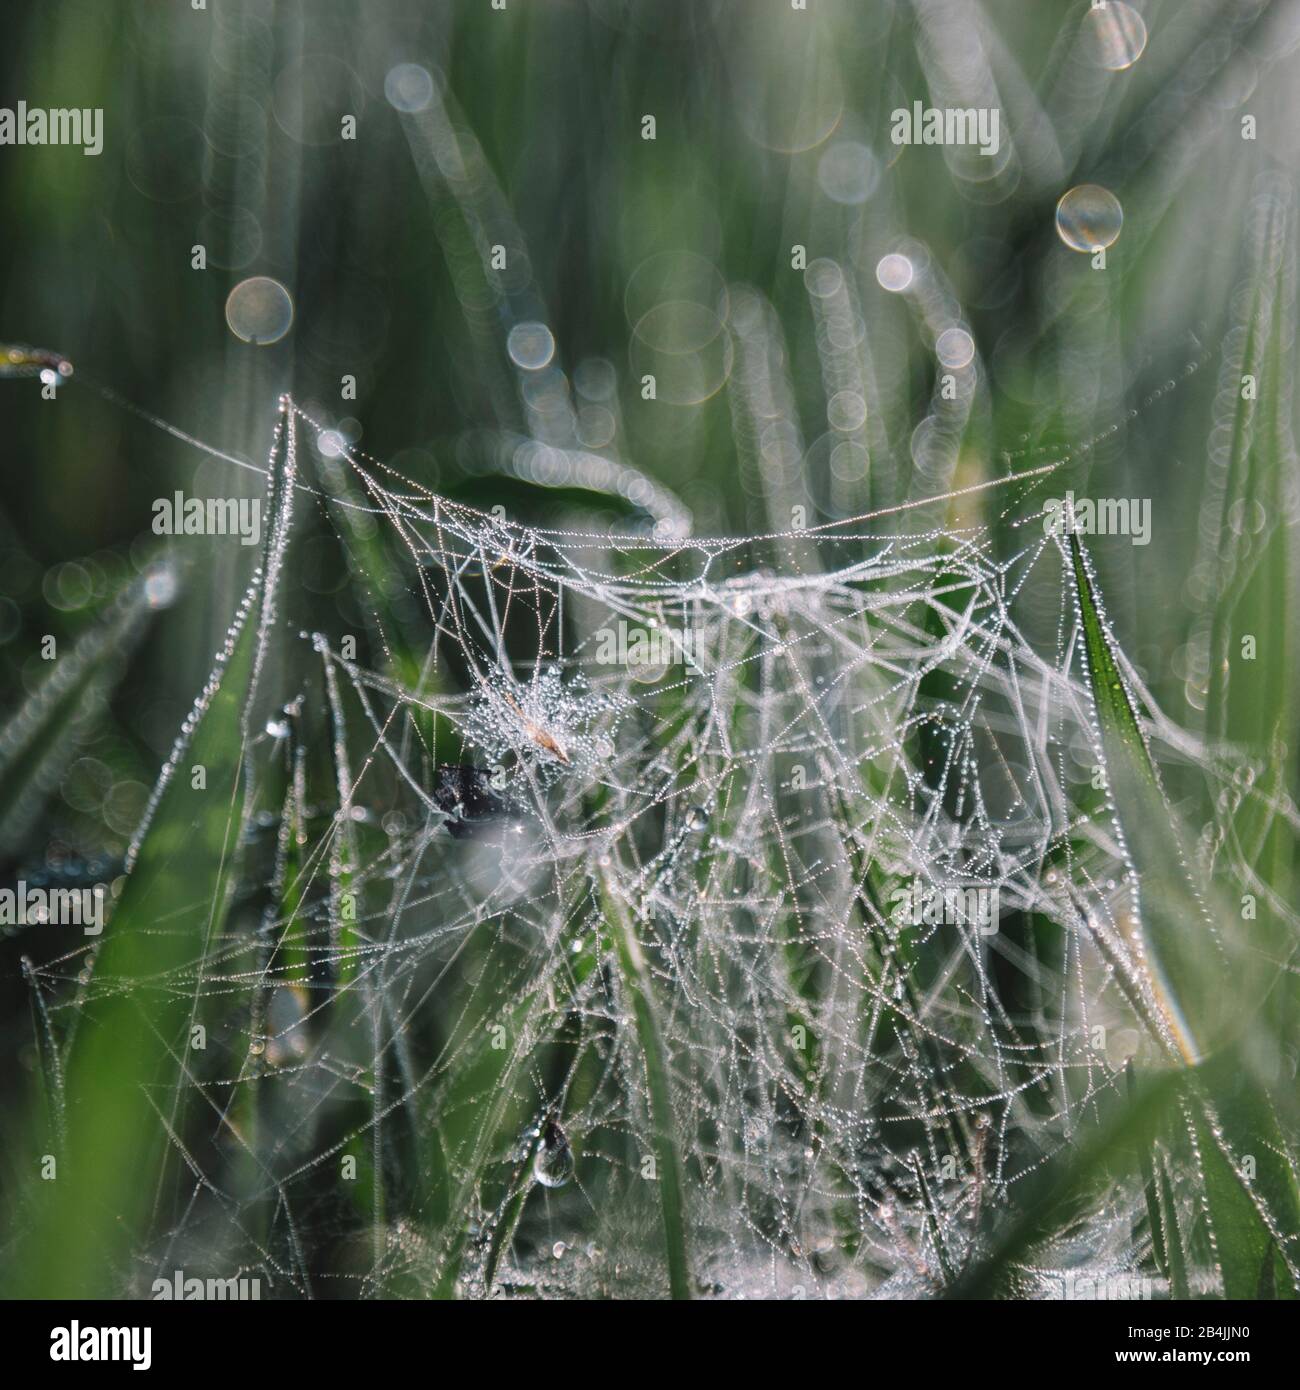 Spider web with water drops, close-up Stock Photo